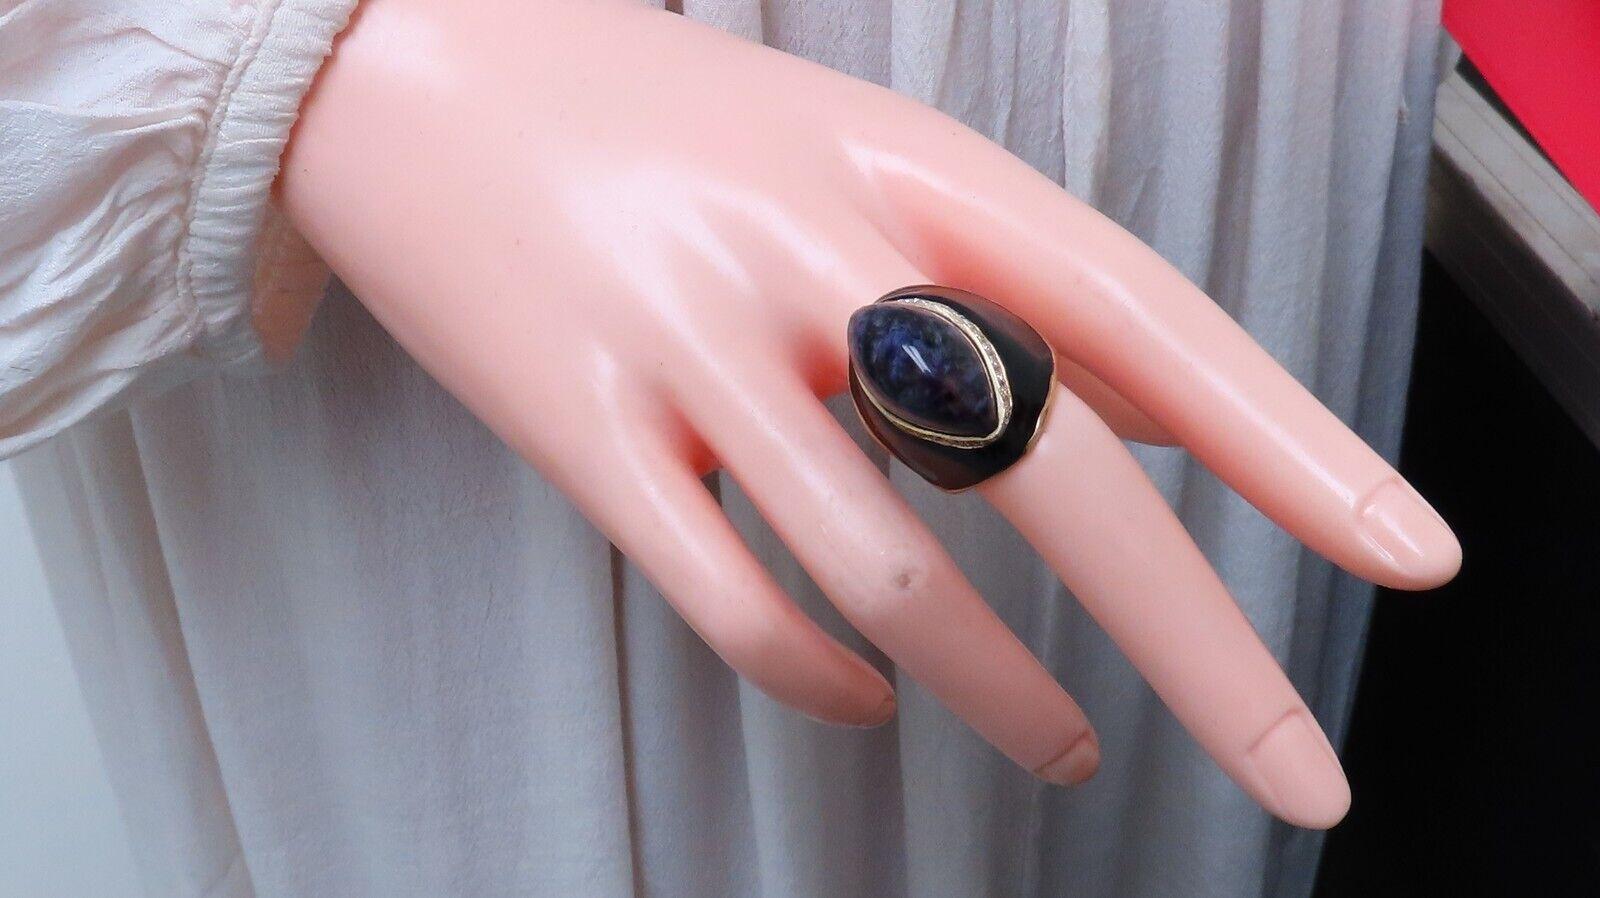 20.00ct. Natural Purple Jade

&

.75ct. diamonds ring

Vs-2 clarity G-color.



Ring, entire handmade

Black enamel finish dome effect

26.30mm wide

from top of jade to finger:

15.50mm



18.5 grams

14kt. yellow gold.

$4,500 Appraisal to